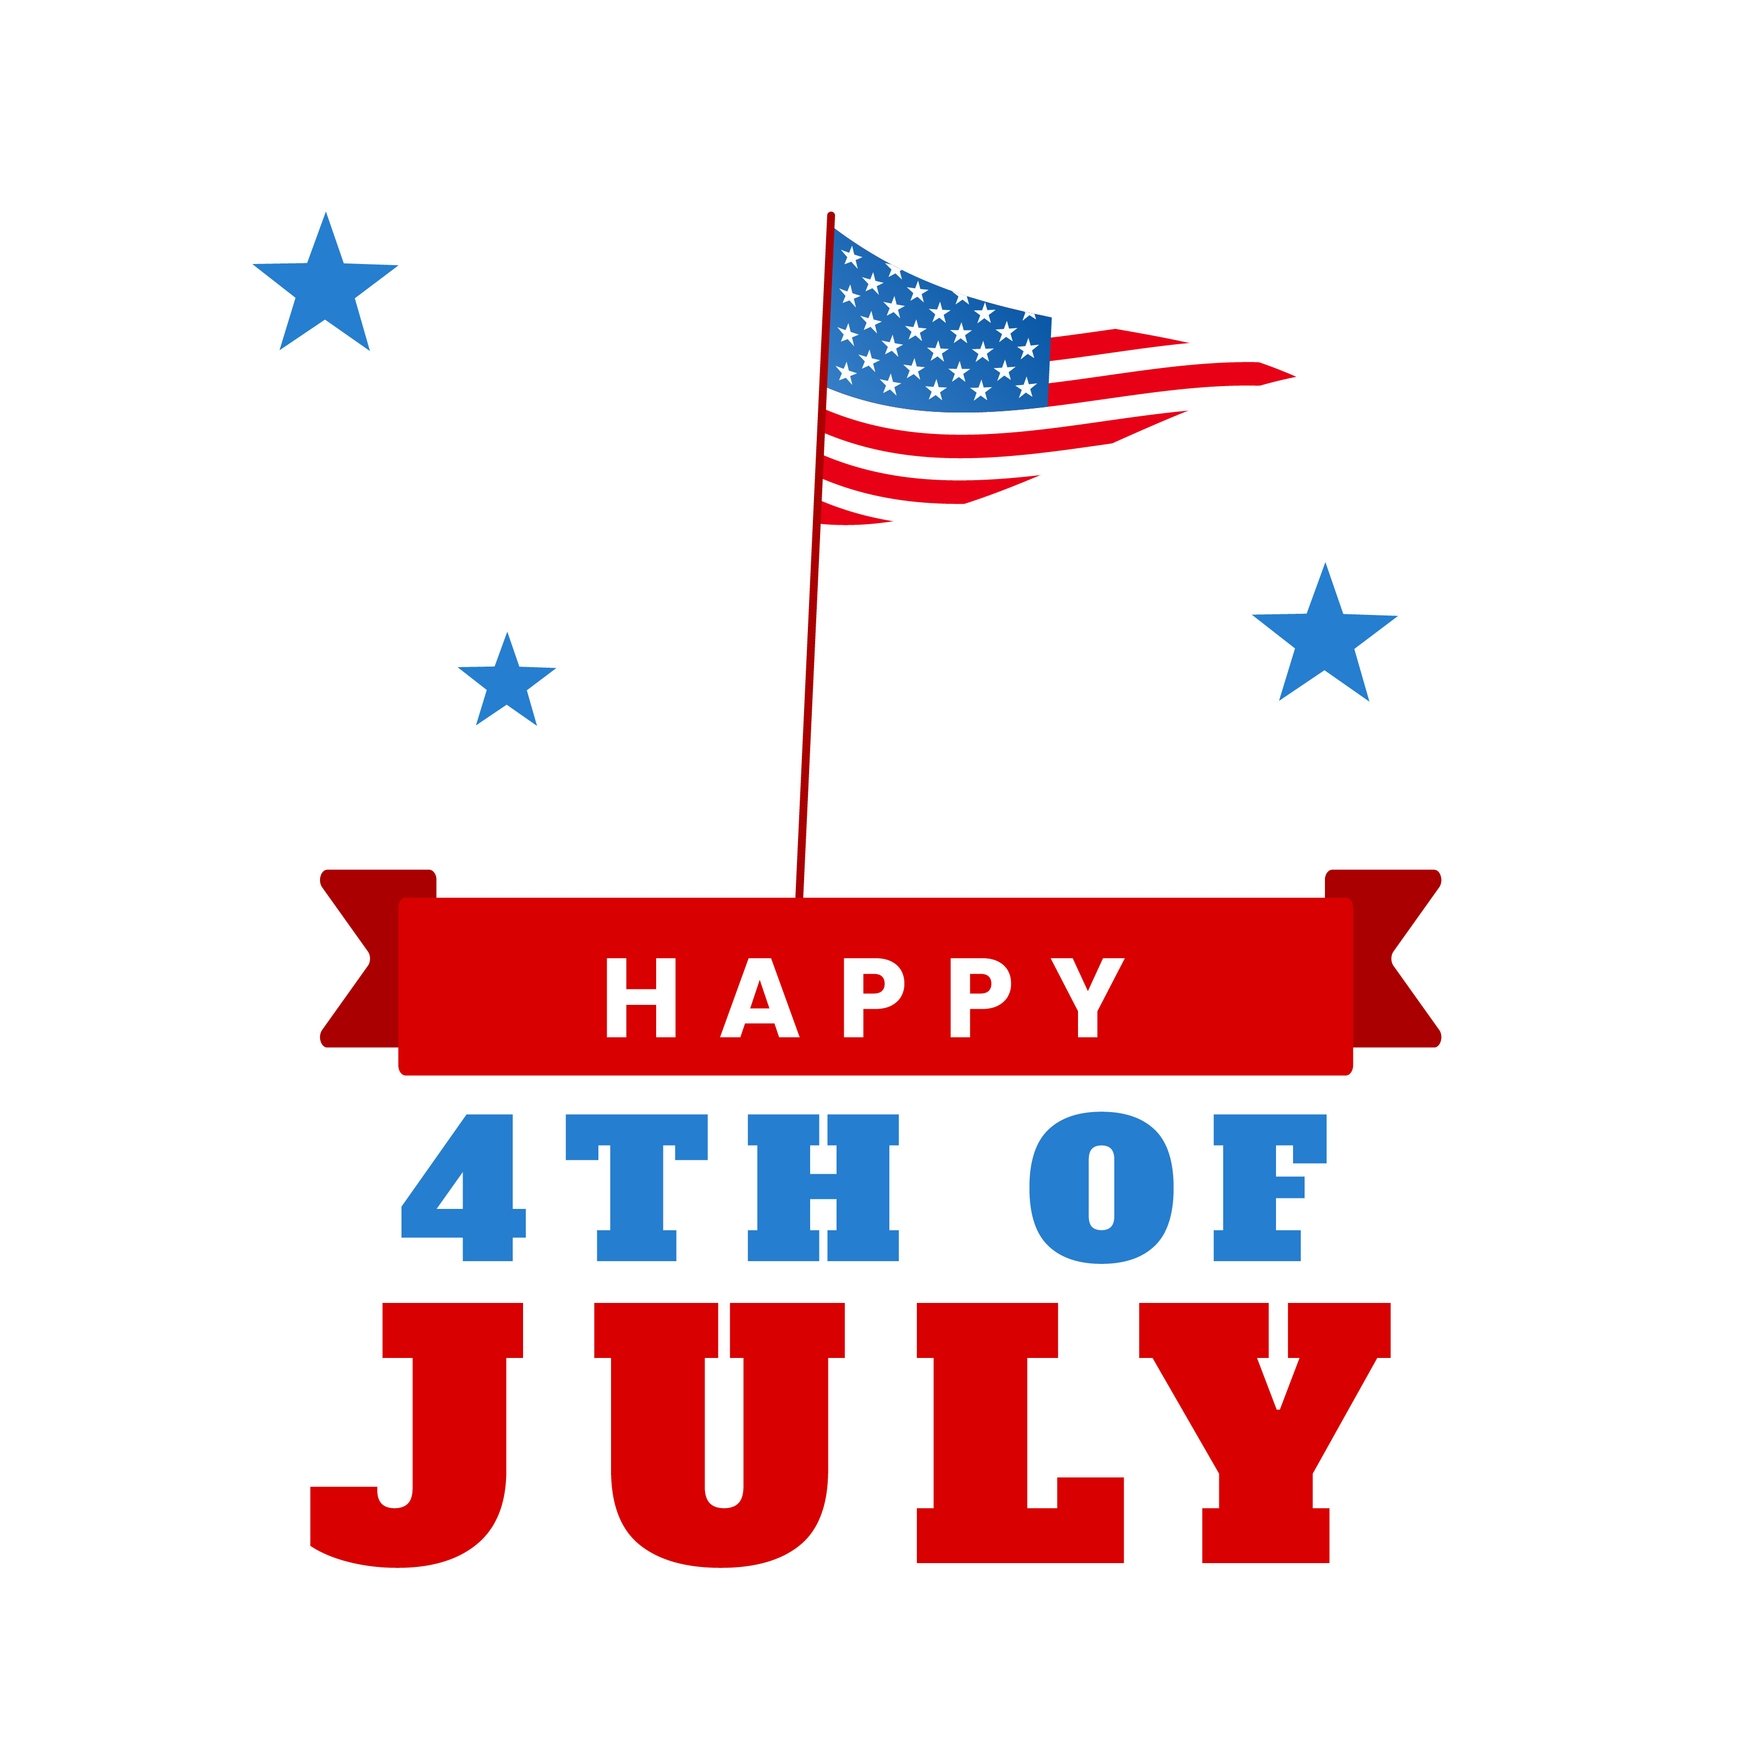 Free Transparent 4th Of July Gif in Illustrator, EPS, SVG, JPG, GIF, PNG, After Effects